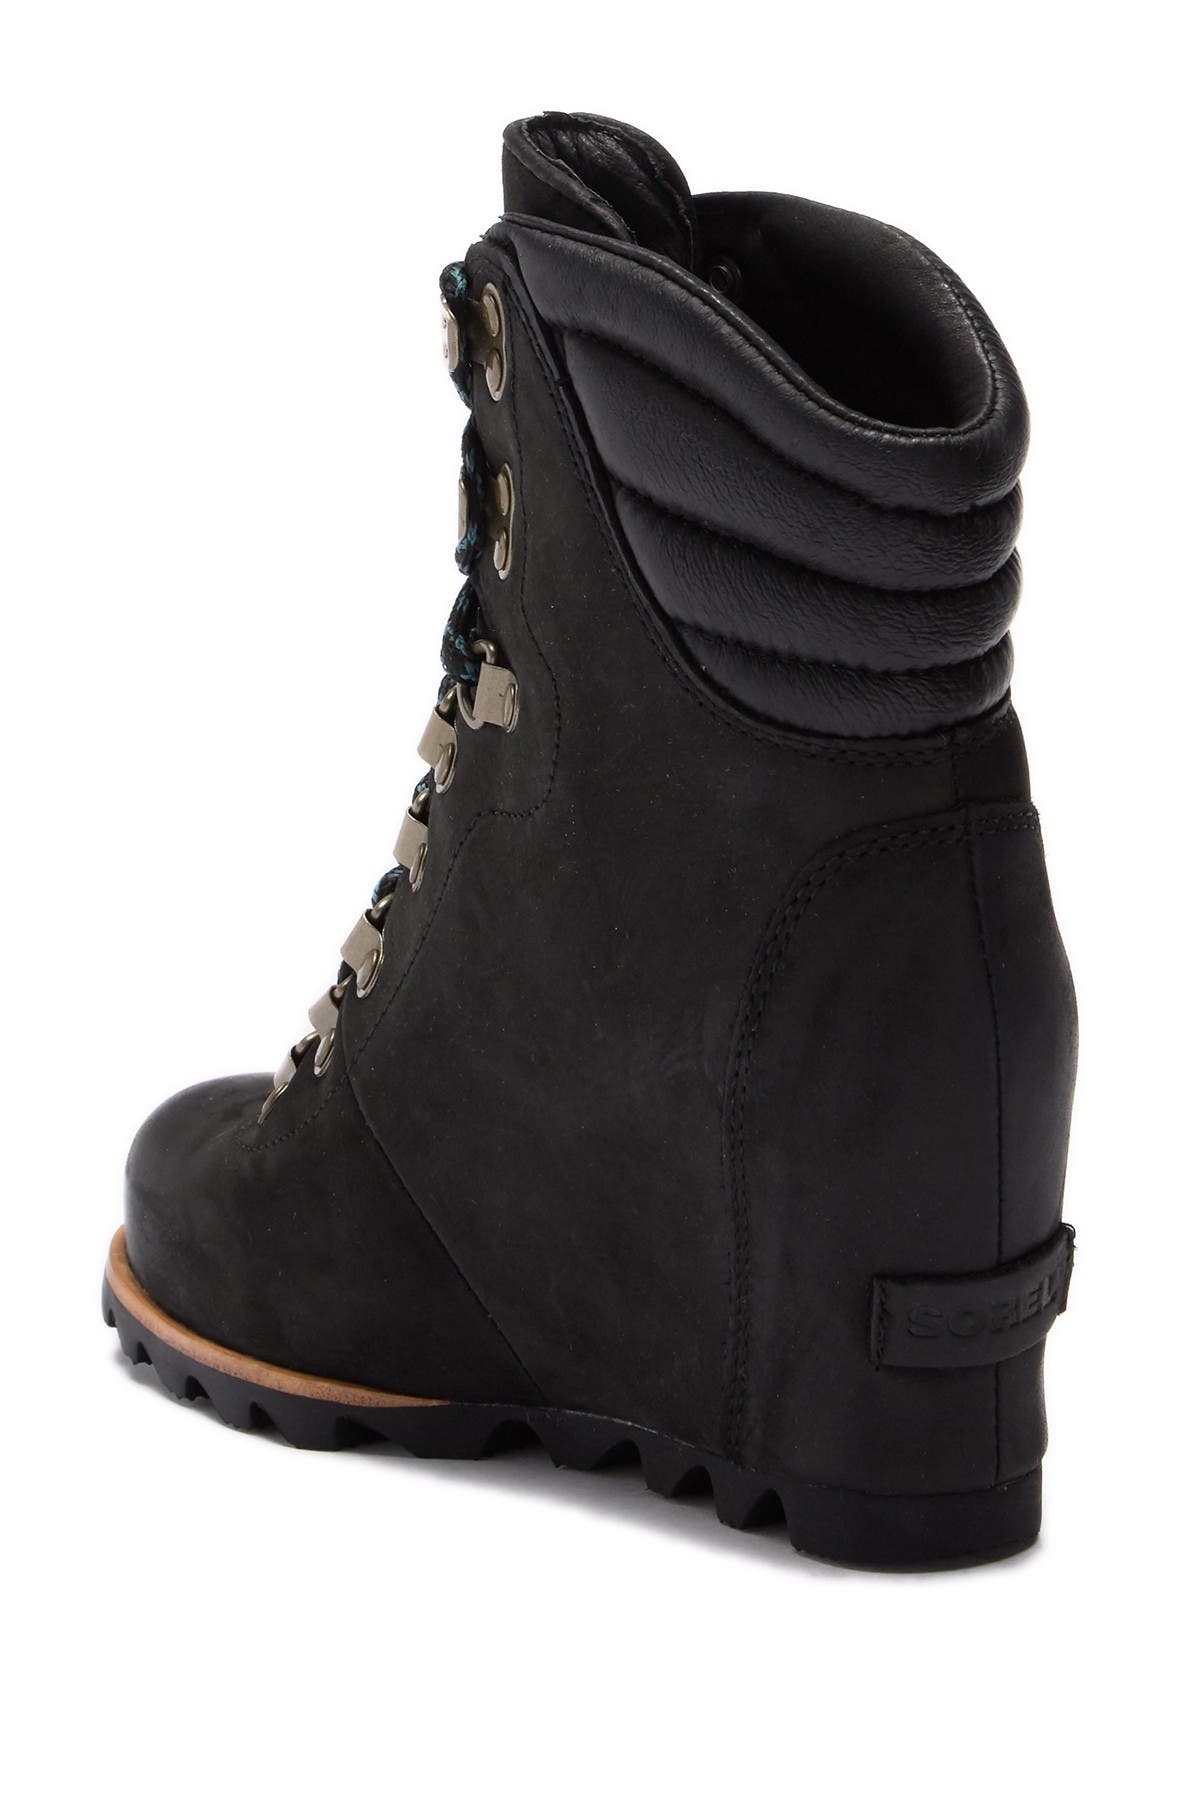 Conquest Waterproof Leather Wedge Boot 